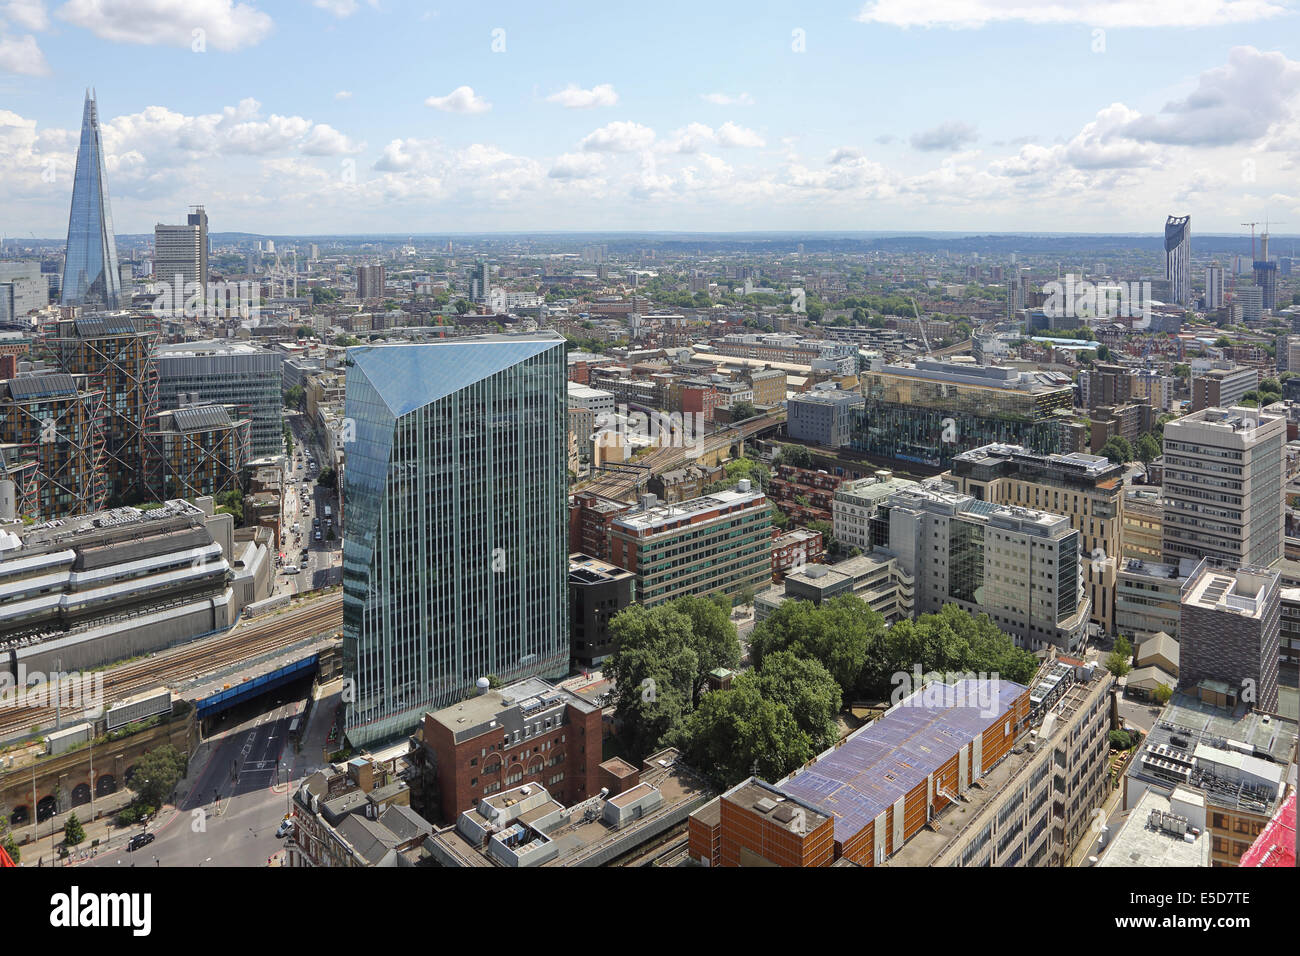 High level view of Southwark, South London, showing The Shard, 240 Blackfriars Road (centre left) and Strata Tower (right) Stock Photo